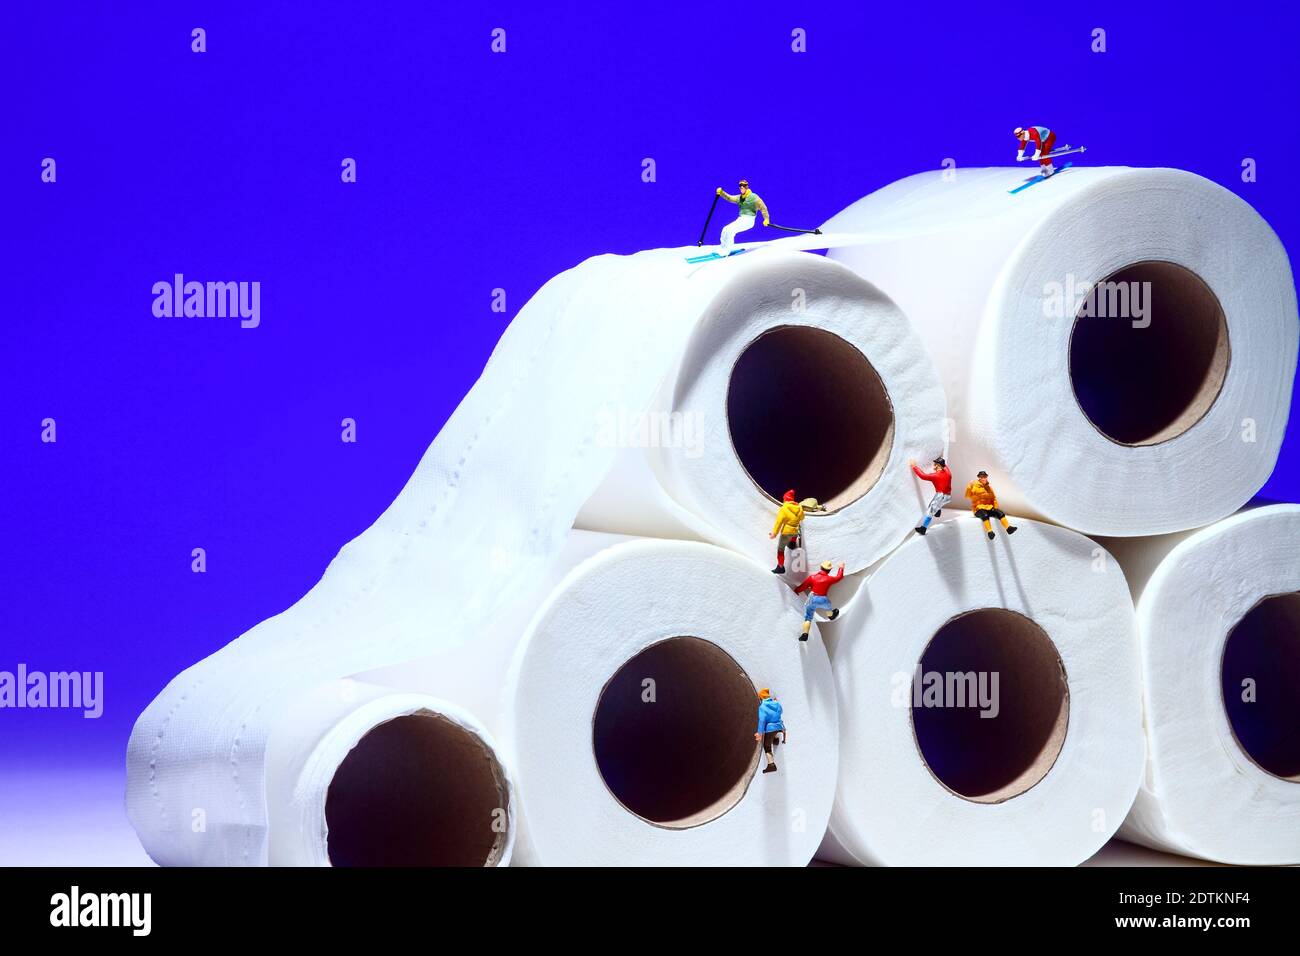 Conceptual image of miniature figure people skiing on toilet roll tissue whilst climbers scale the outside of the tubes Stock Photo